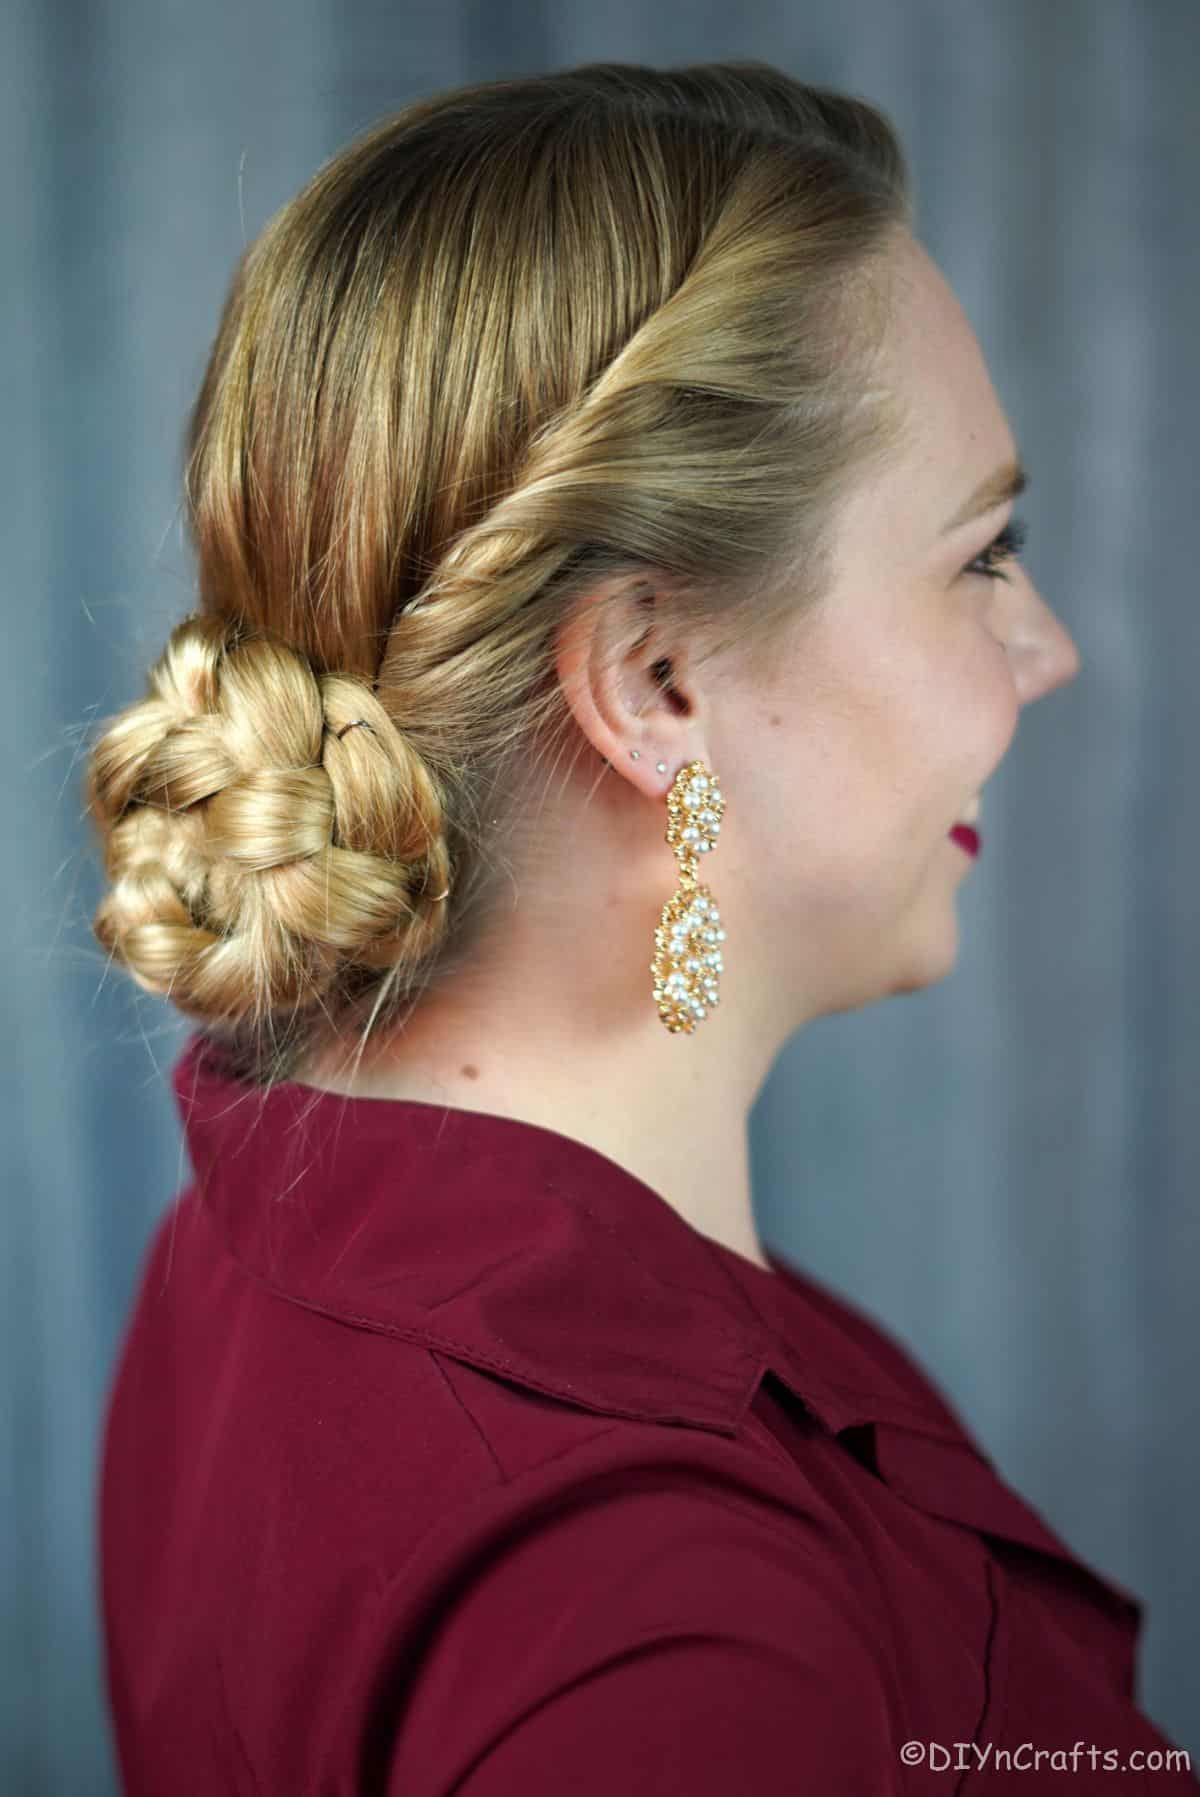 twisted braided low bun on blonde haired woman in maroon shirt